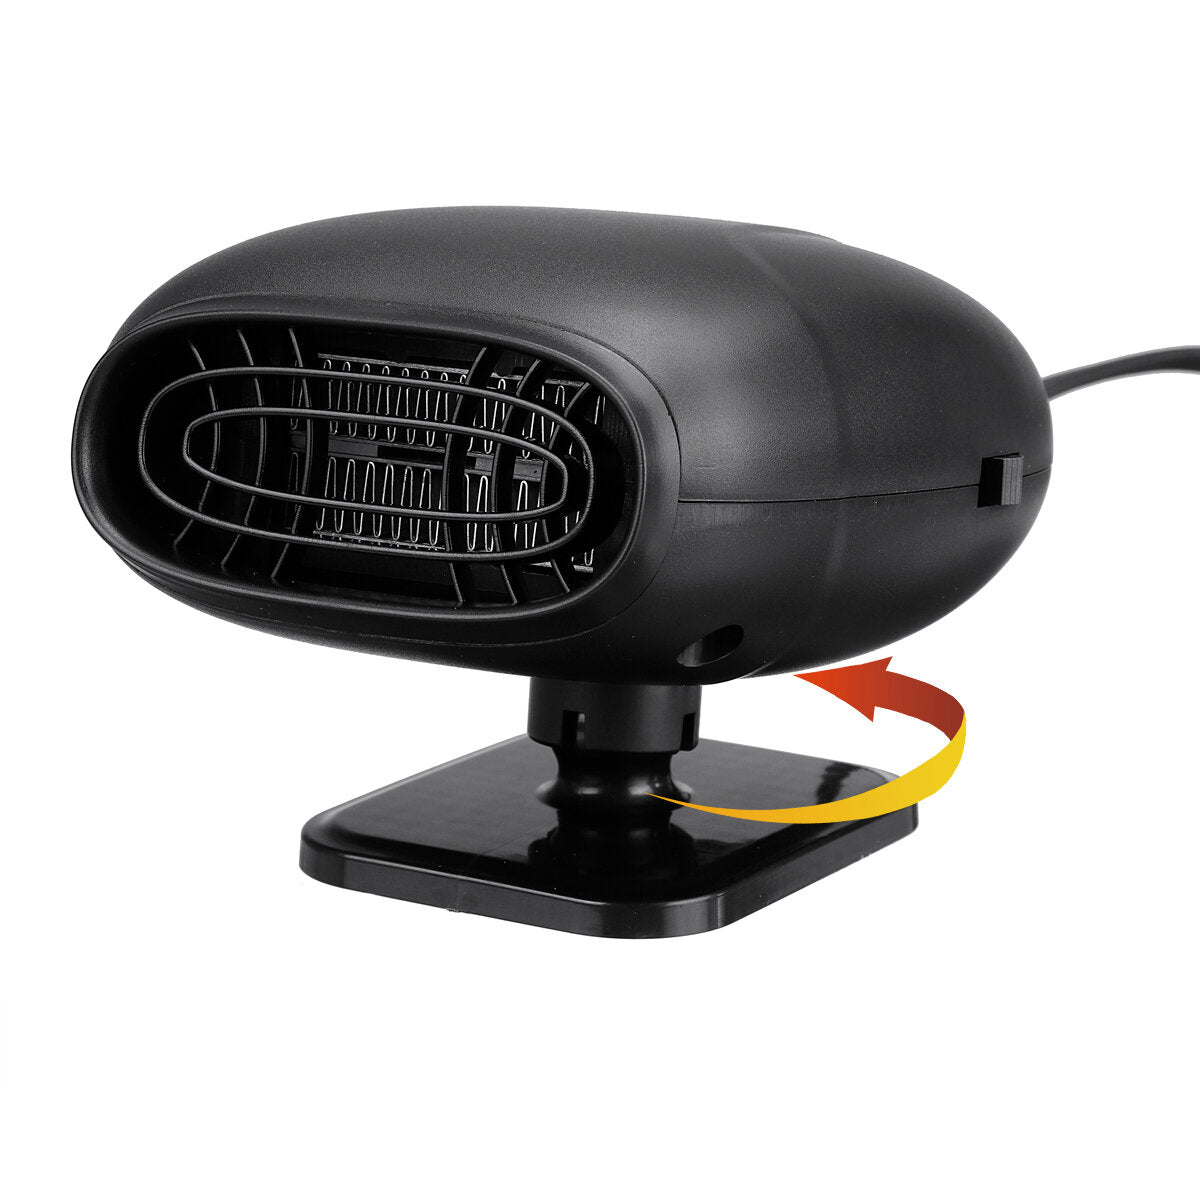 3-IN-1 12V/24V Portable Vehicle Heater 360 Rotating Car Auto Electric Heater Heating Cooling Fan Defroster Demister